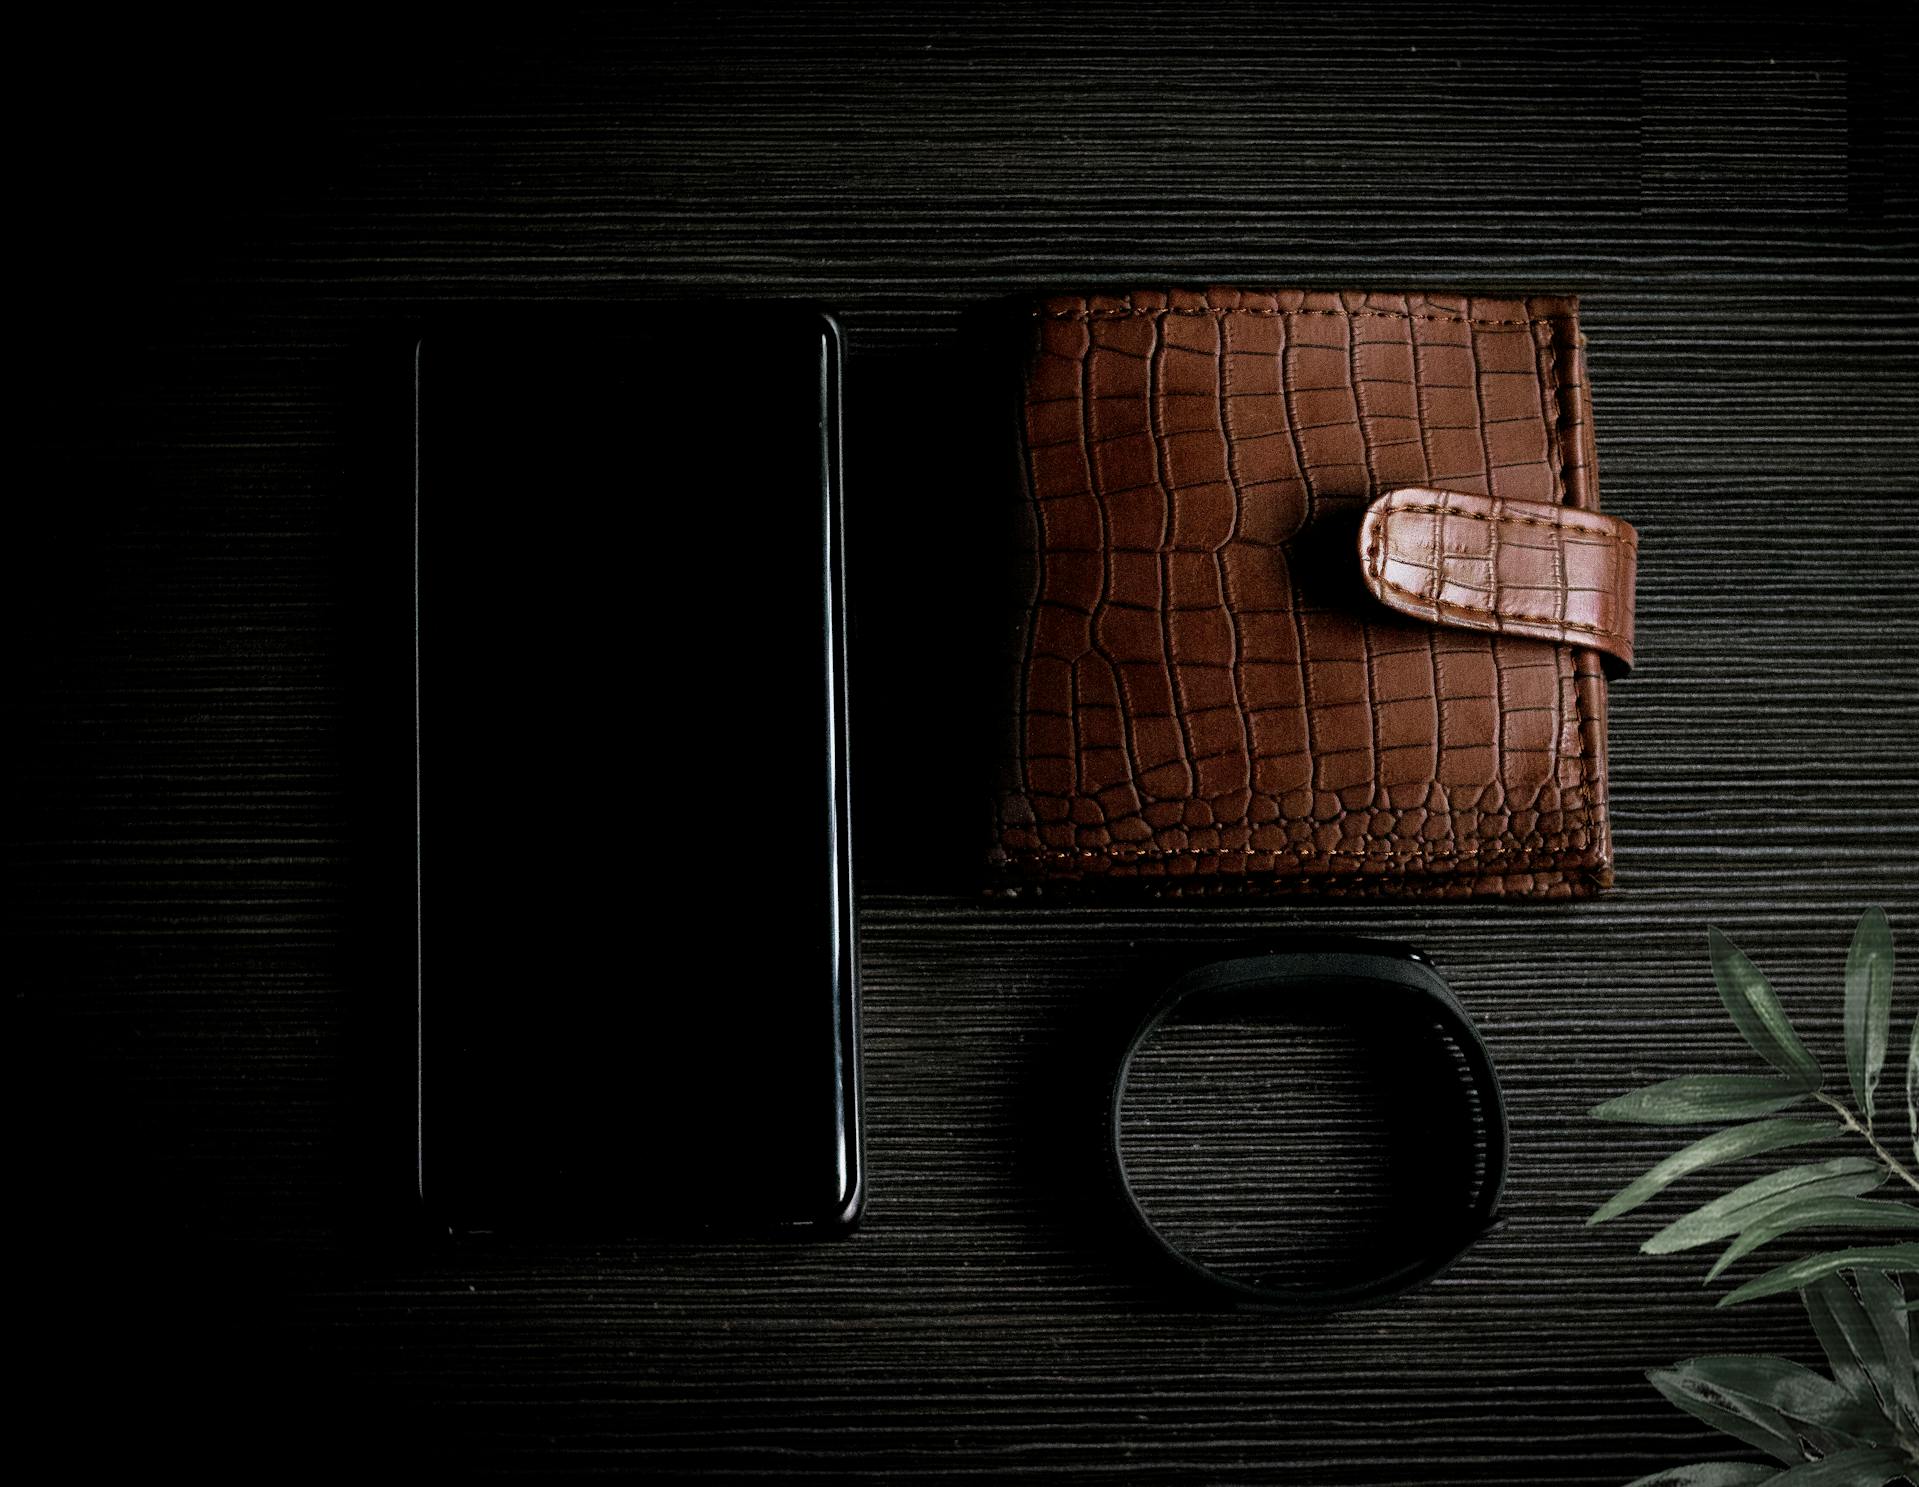 A wallet, phone and bracelet on a table | Source: Pexels